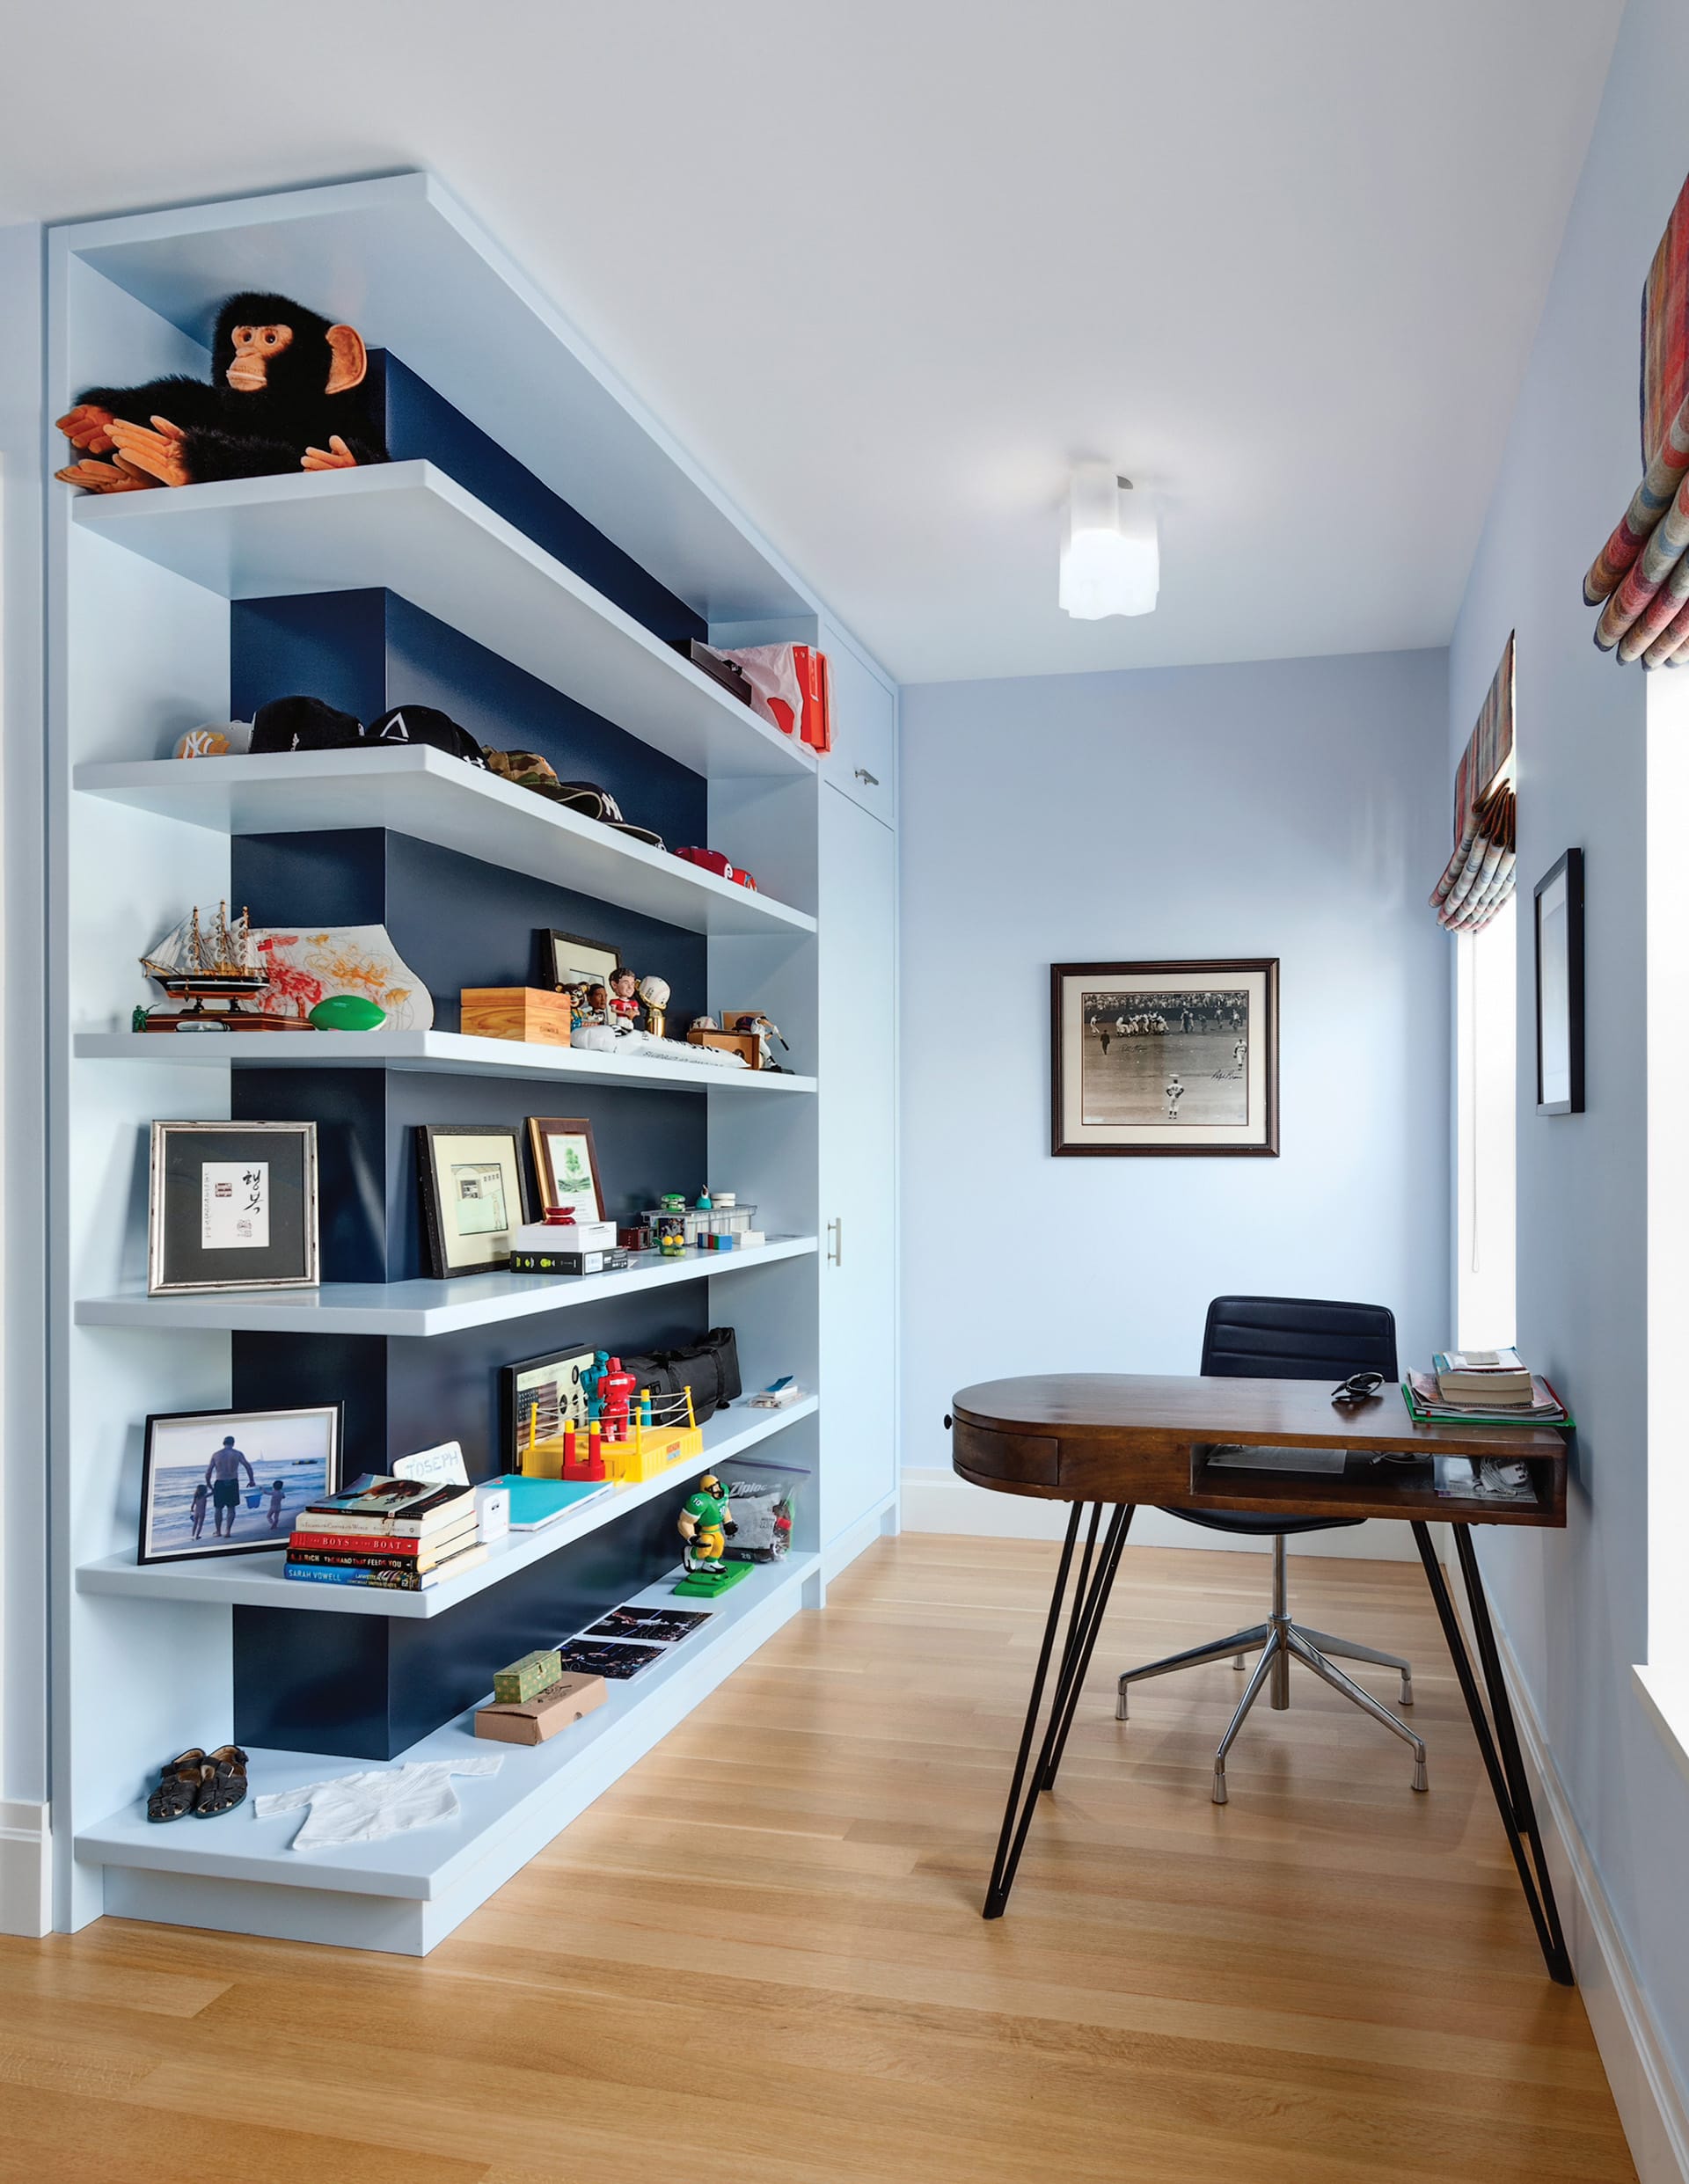 Desk in a child's bedroom with light blue walls and built-in shelving.